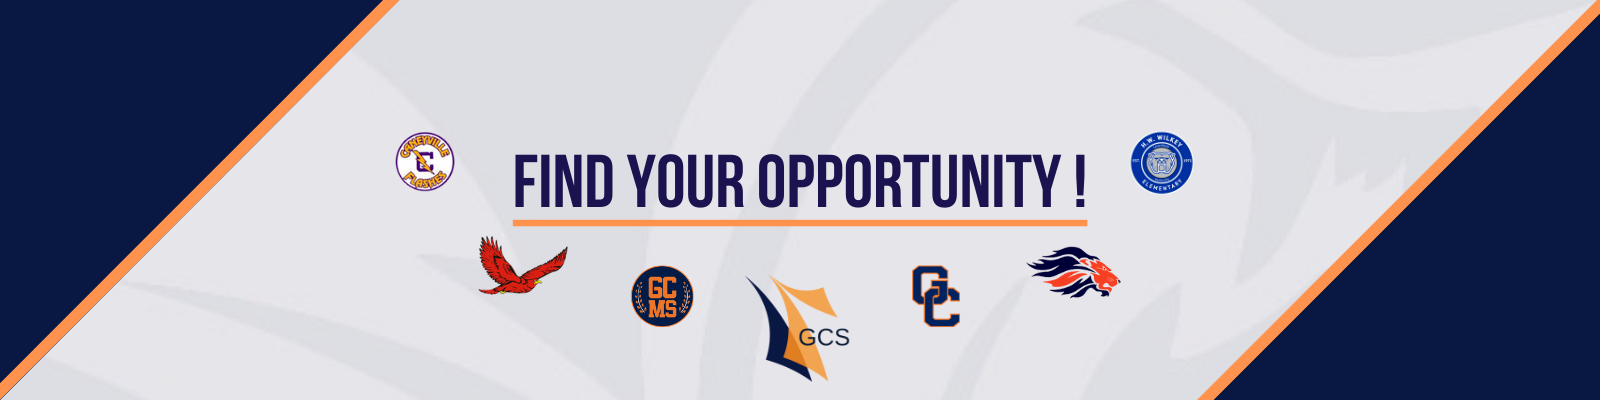 Find Your Opportunity surrounded on bottom half with GCS and Schools logos